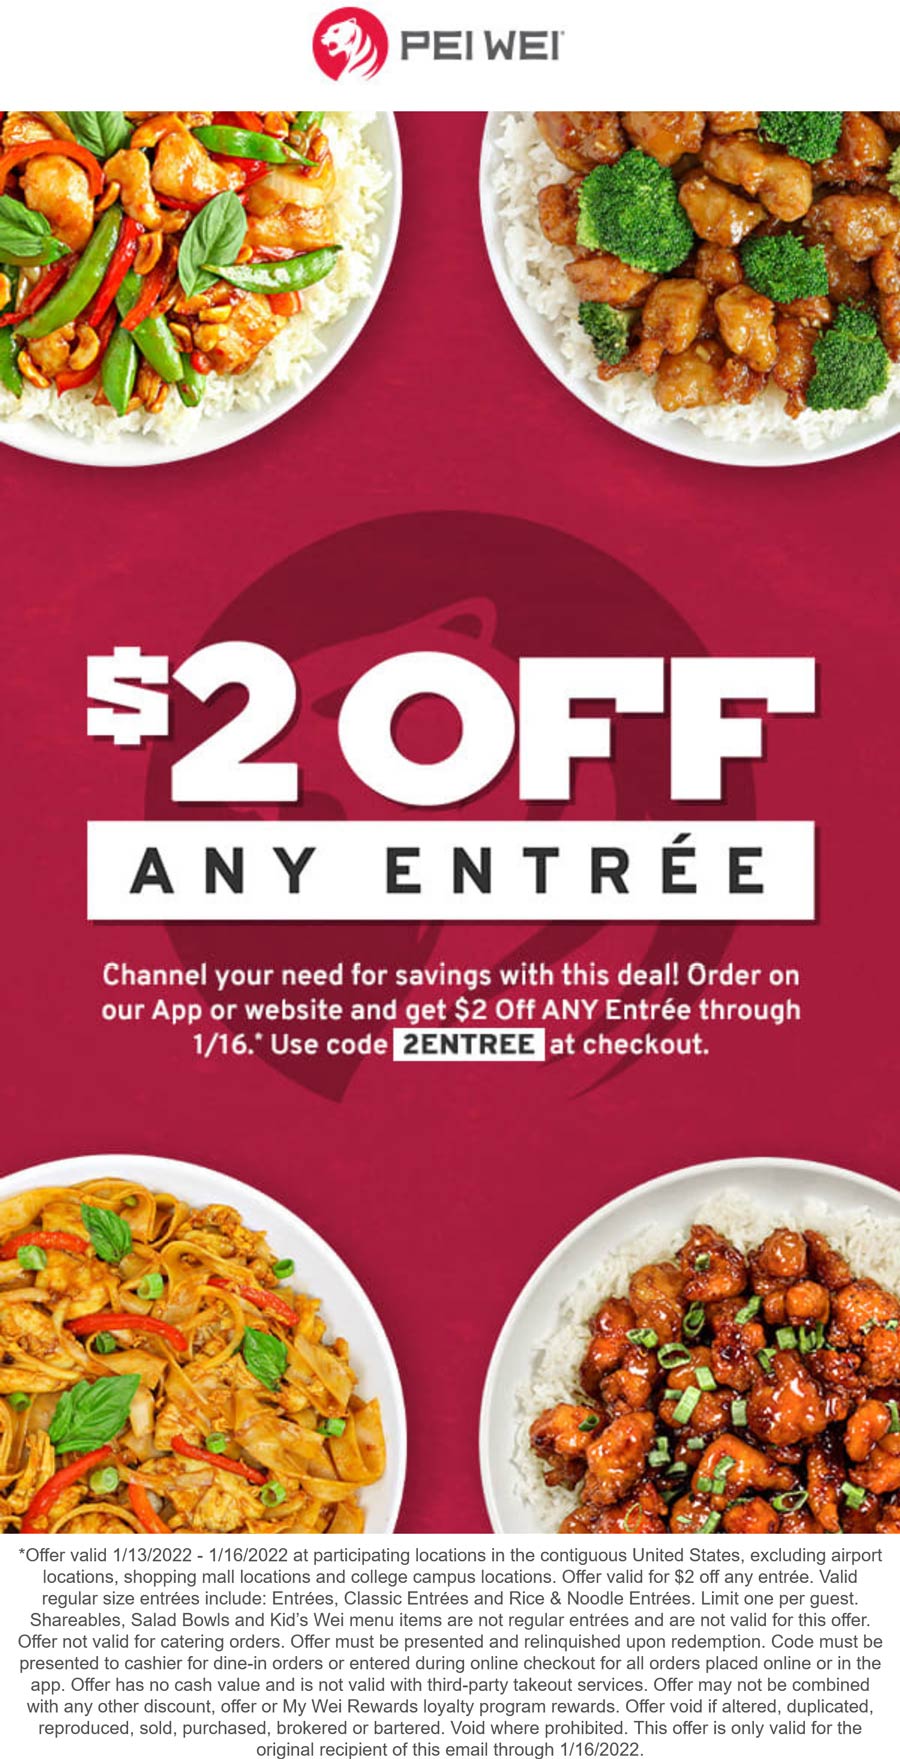 Pei Wei coupons & promo code for [August 2022]